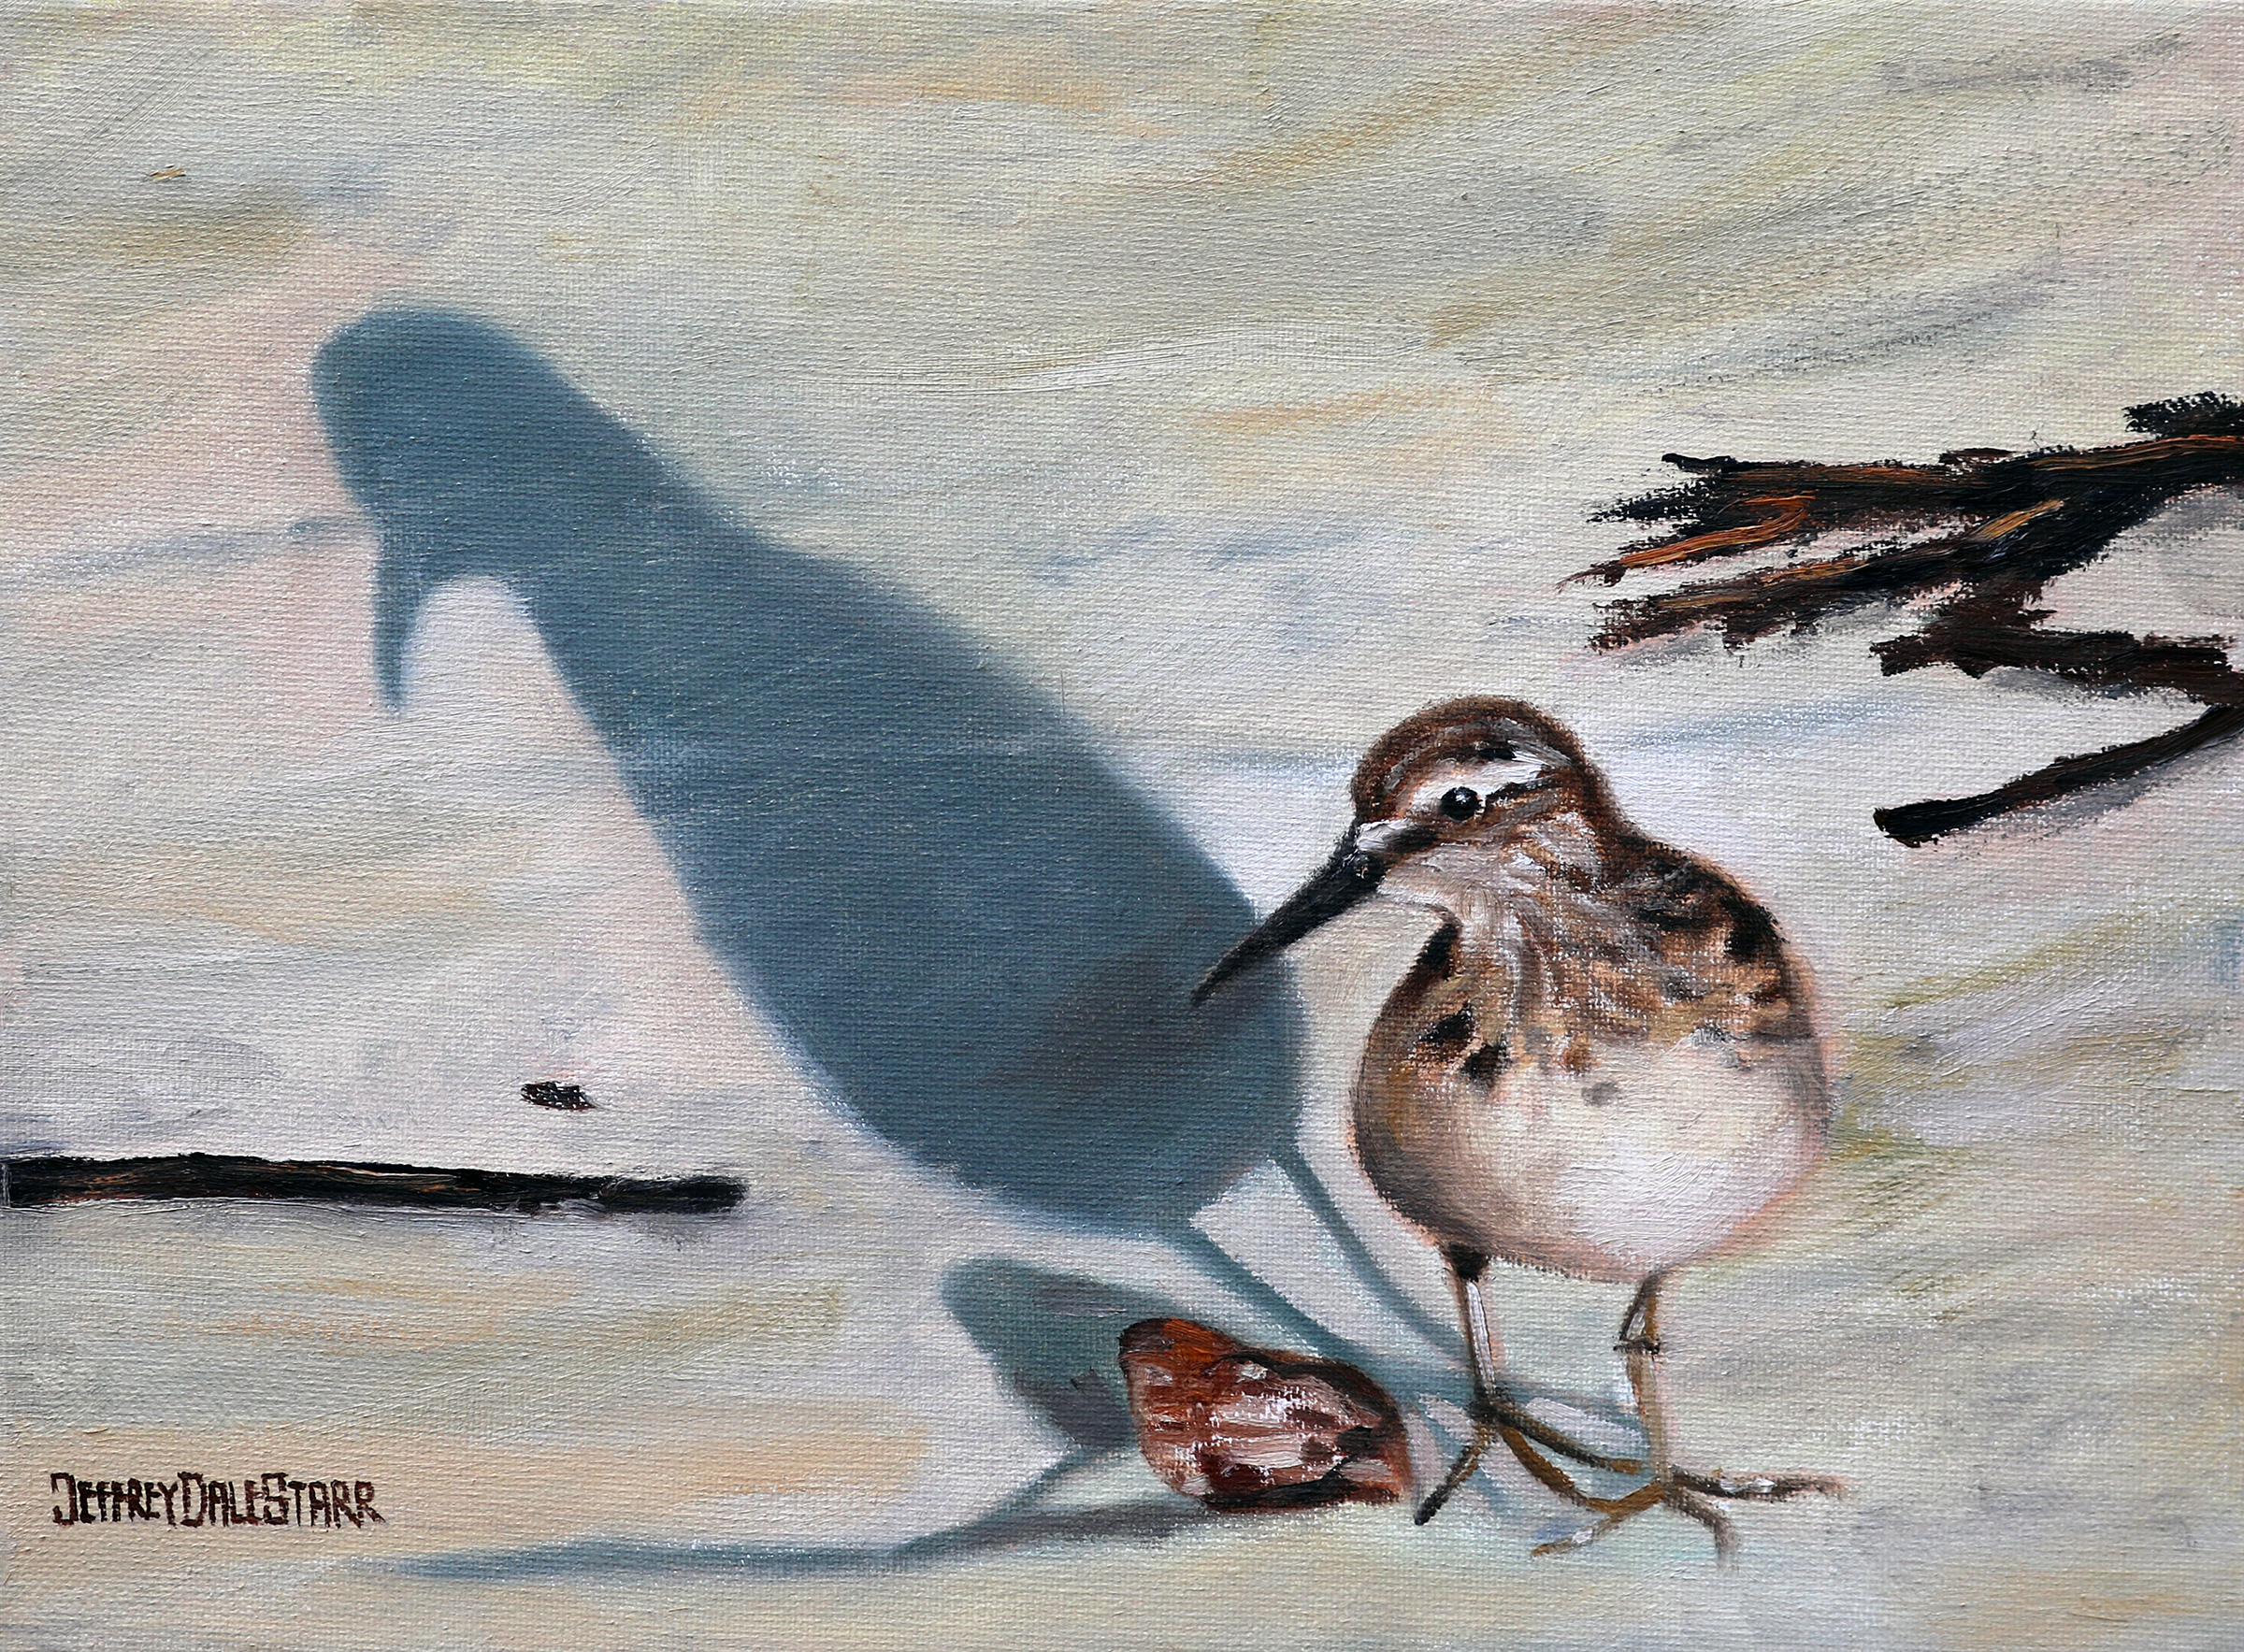 Oil painting "Sandpiper and Shell" by Jeffrey Dale Starr